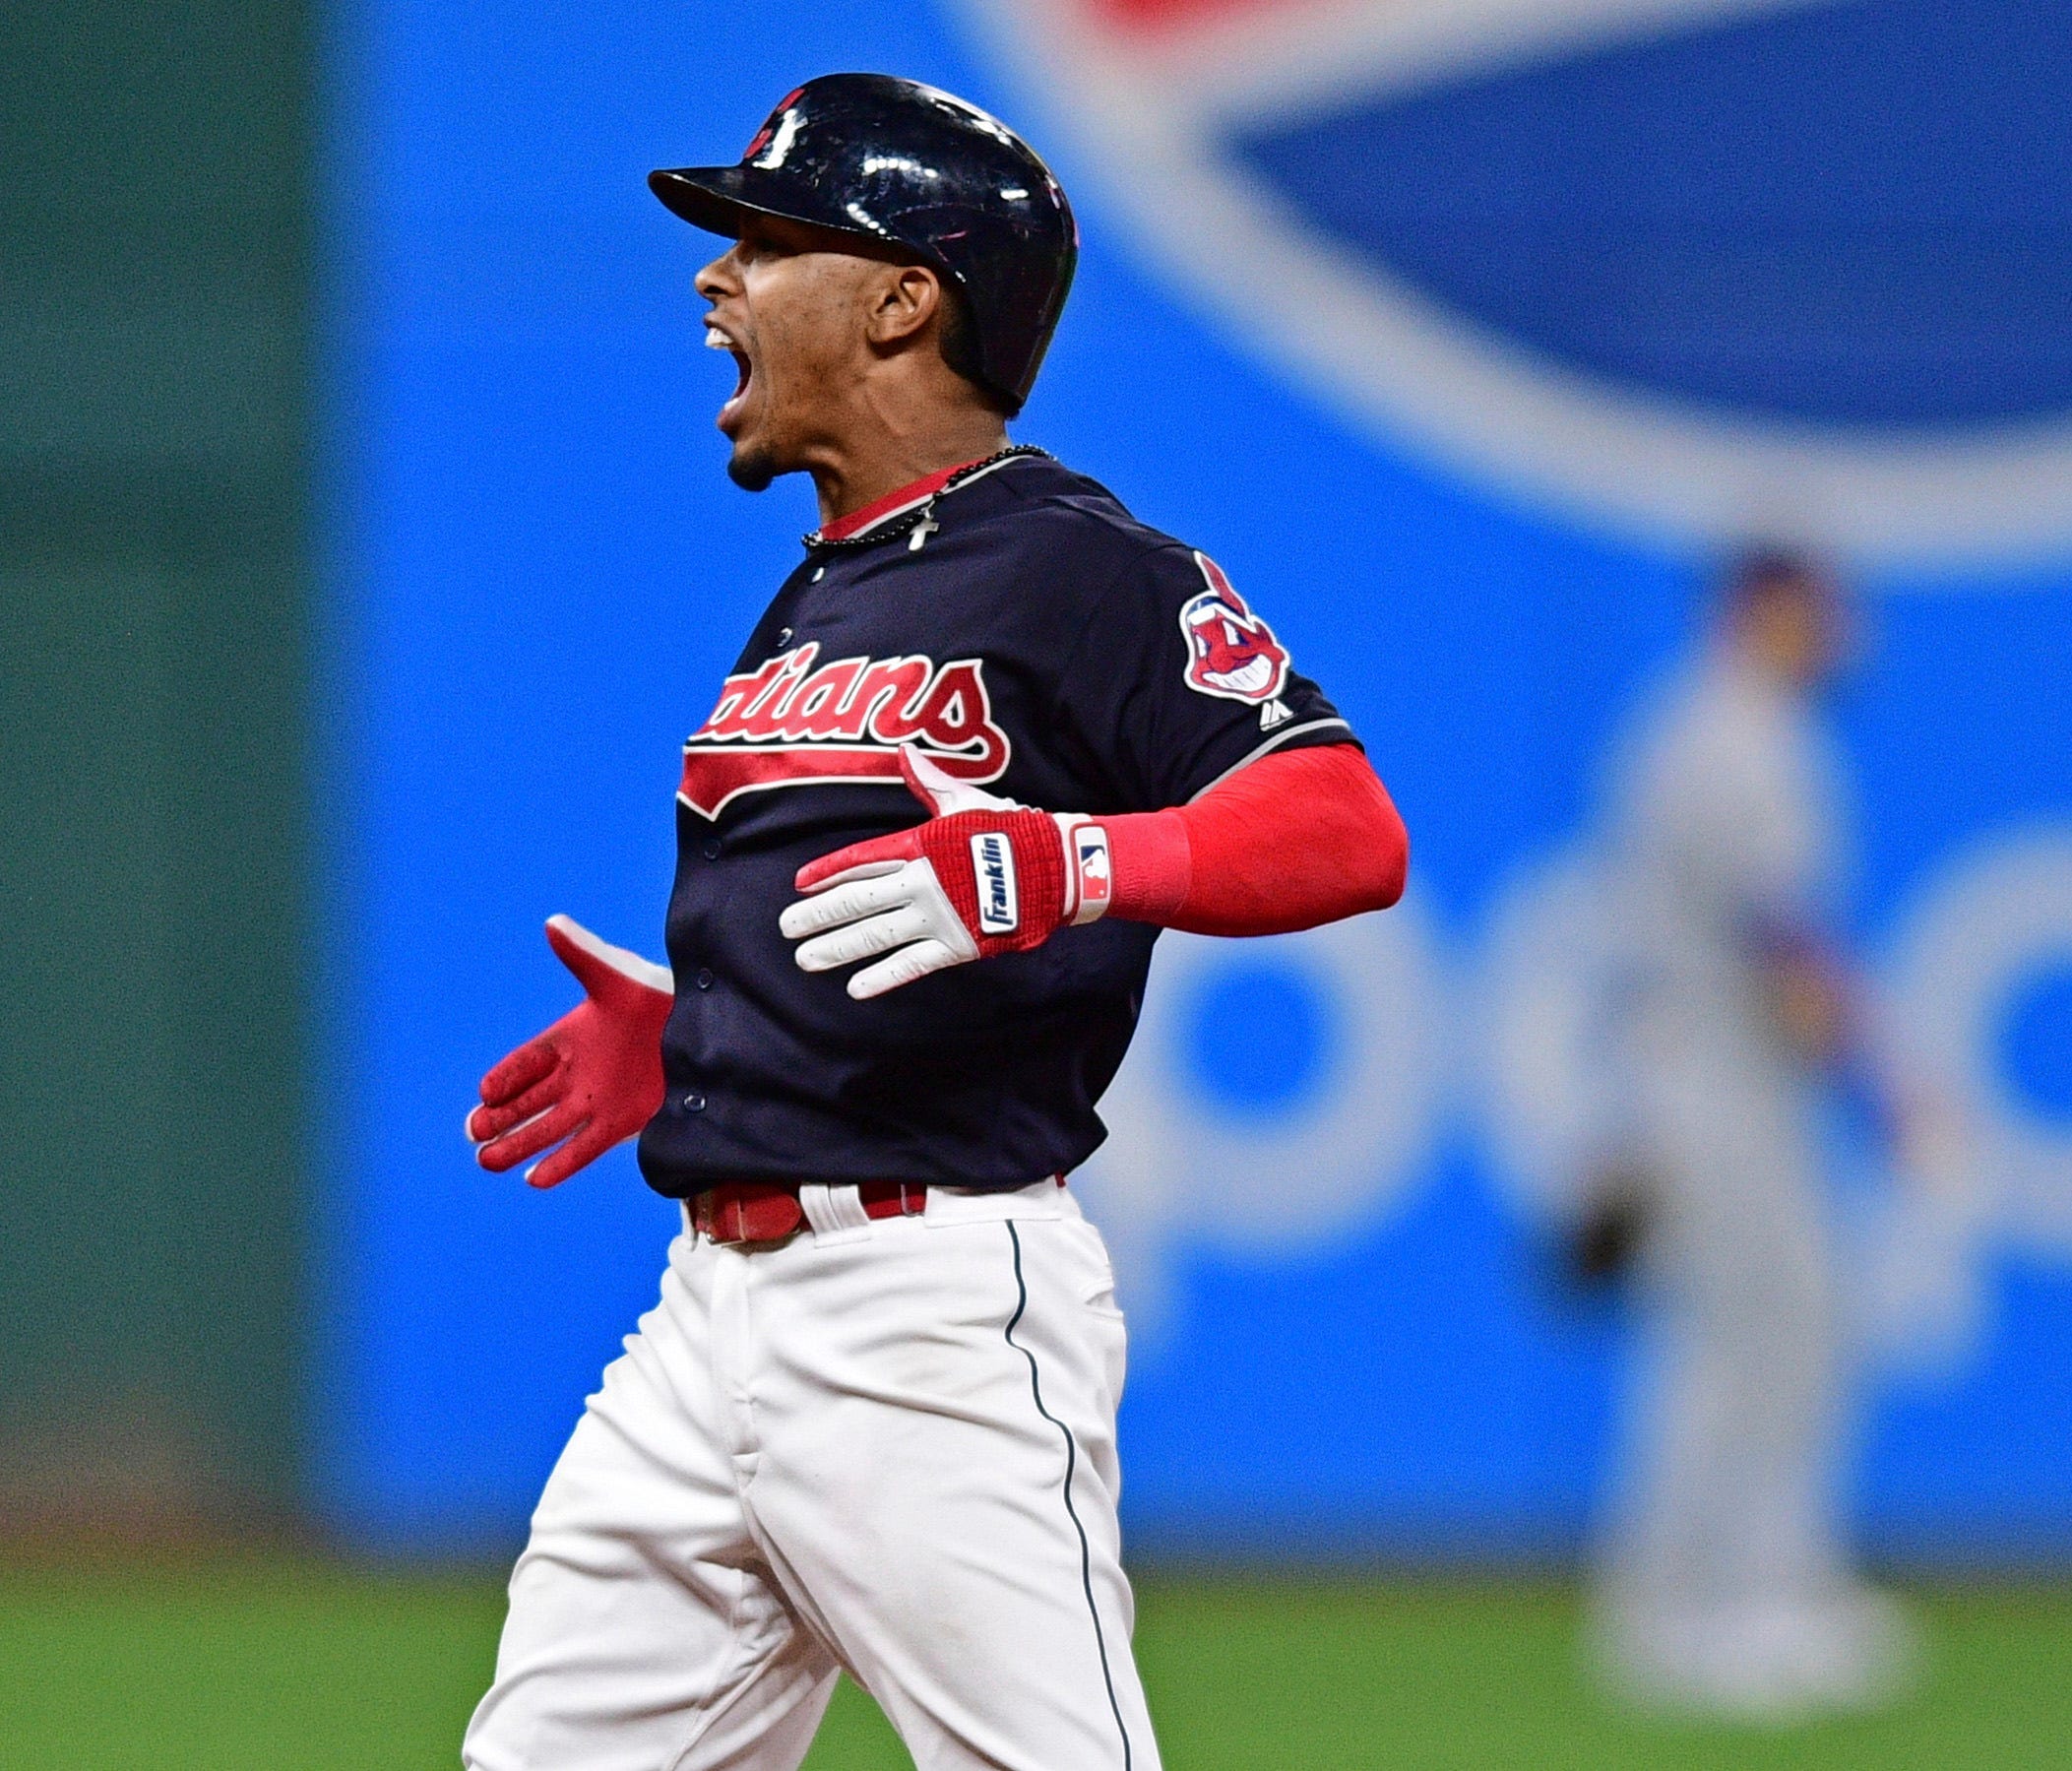 Cleveland Indians' Francisco Lindor celebrates after hitting a RBI double in the ninth inning of a baseball game against the Kansas City Royals, Thursday, Sept. 14, 2017, in Cleveland. (AP Photo/David Dermer) ORG XMIT: OHDD120